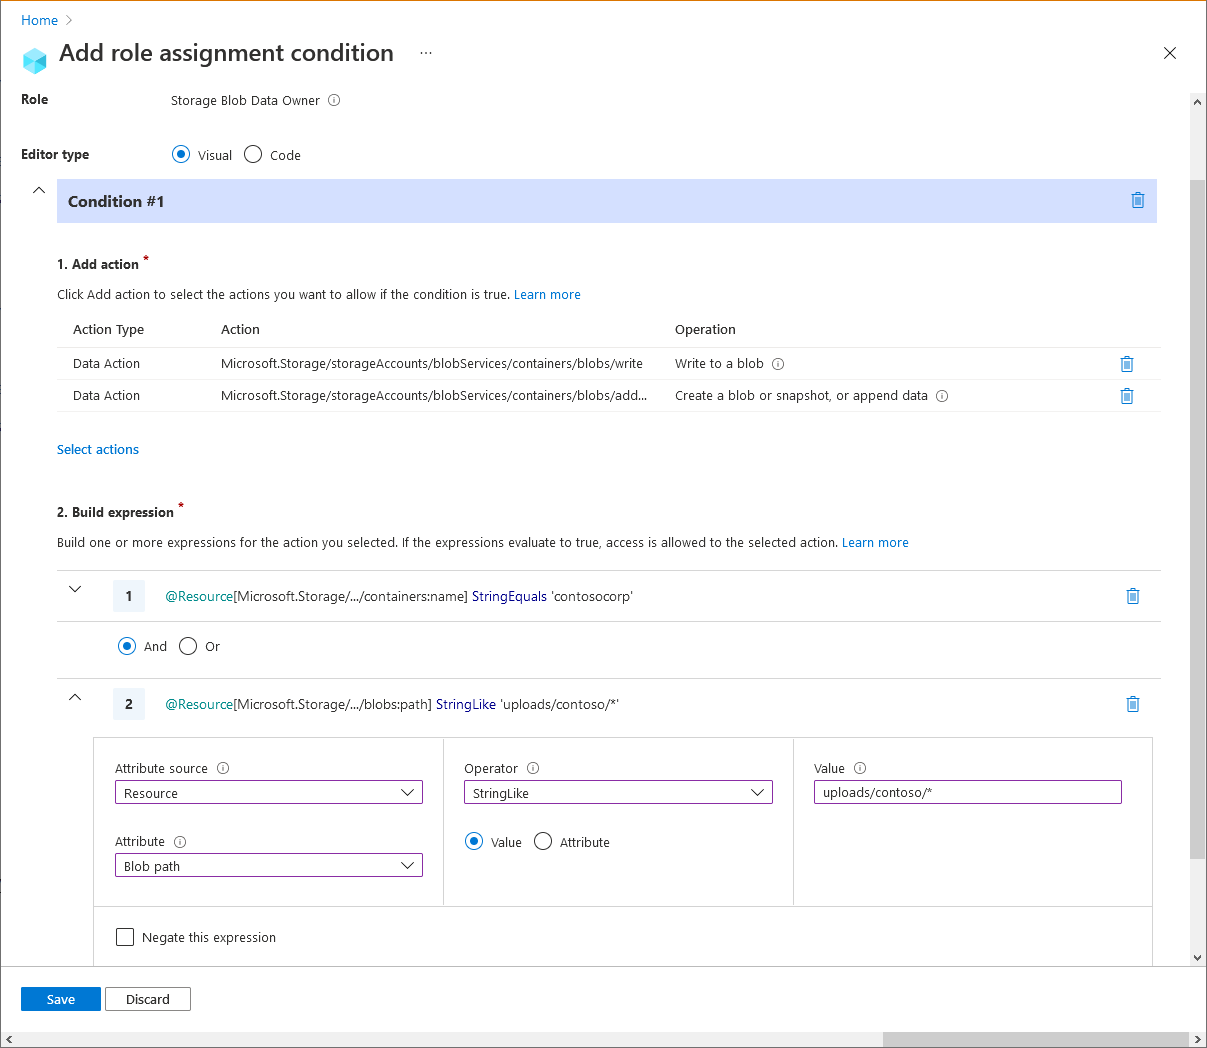 Screenshot of example 7 condition 1 editor in Azure portal.